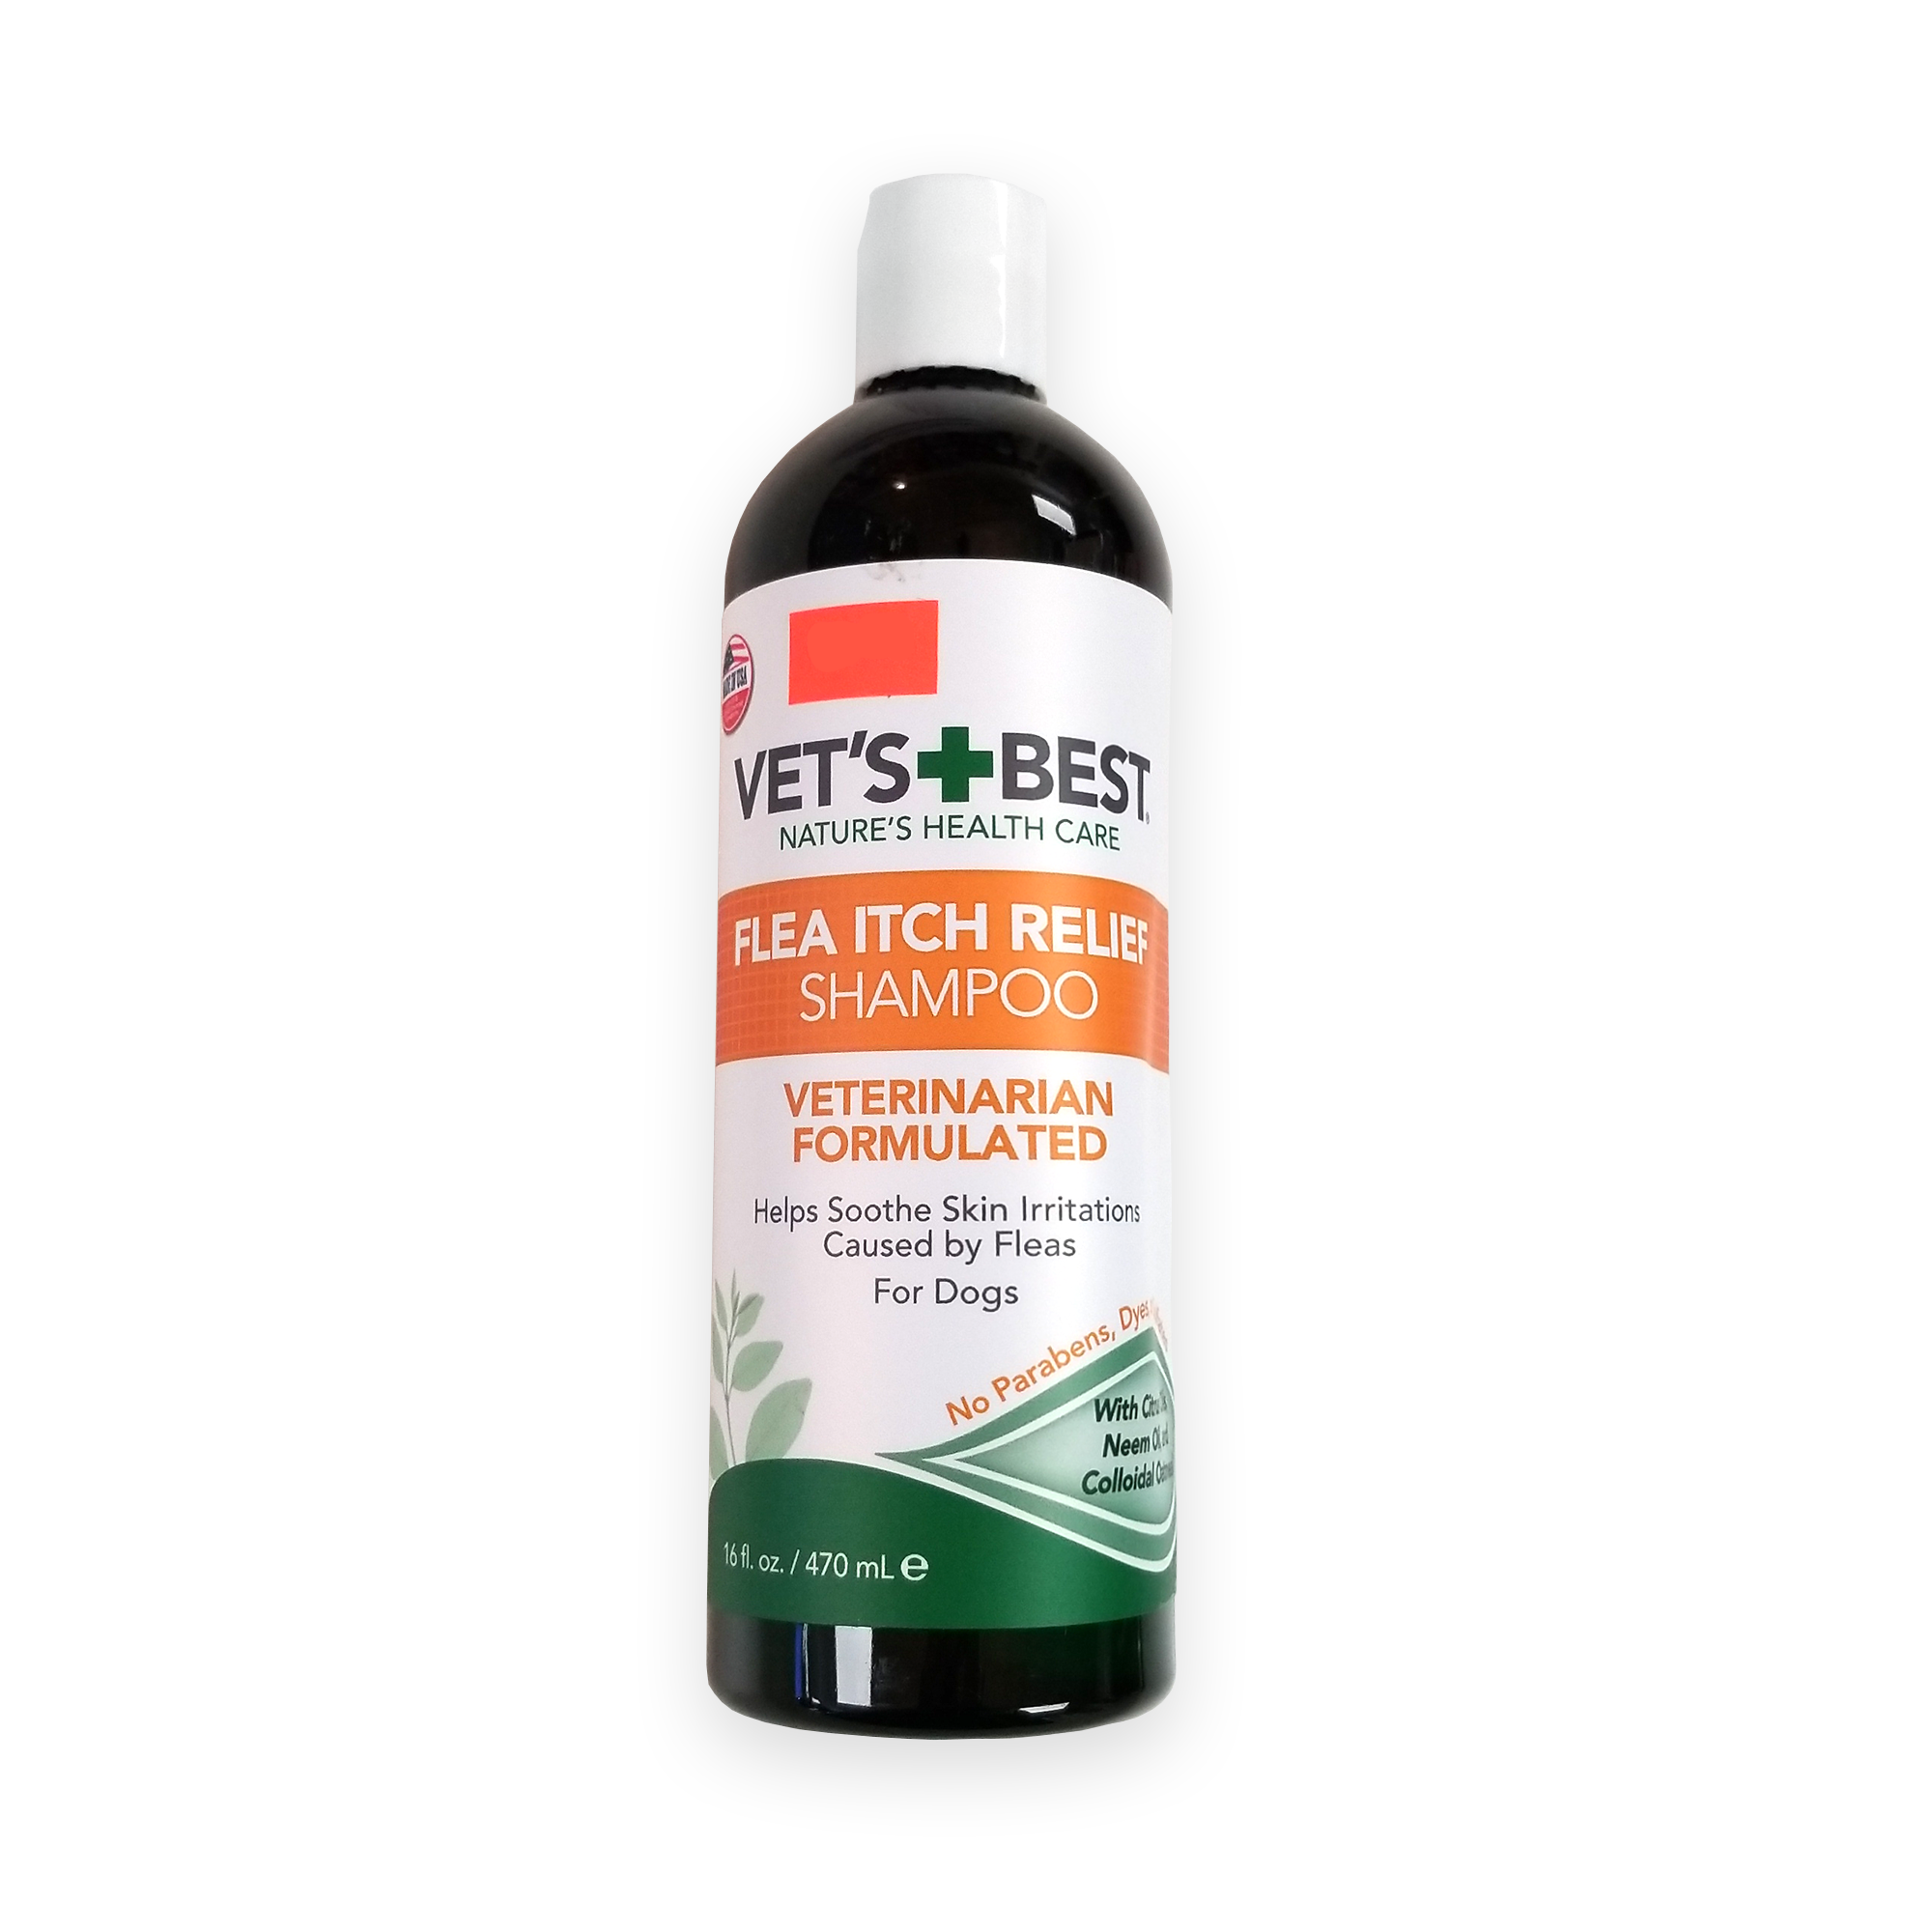 Vets Best Flea Itch Relief Shampoo With Citrus Oil Neem Oil Colloidal Oatmeal (470ml)